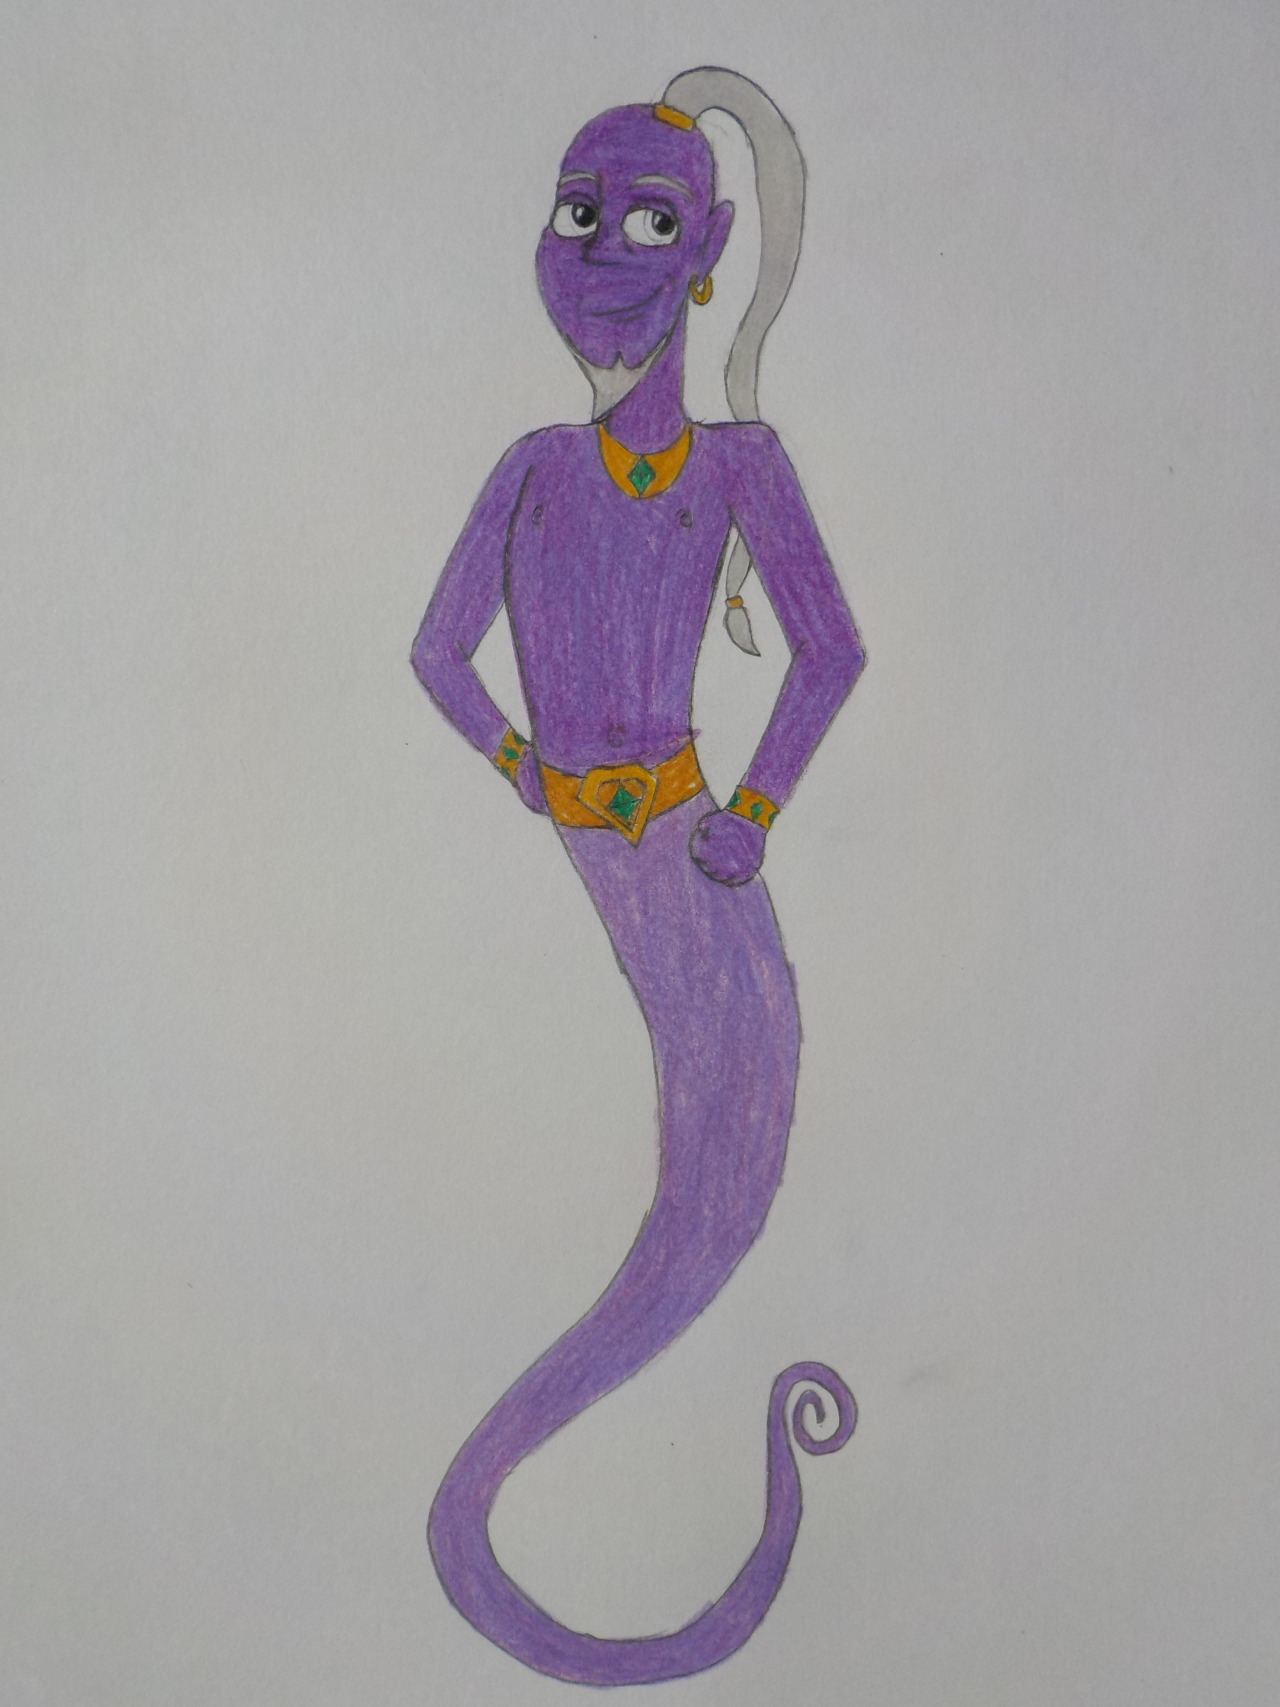 Meet Ruso the Grand, the former King of the Genies and the late father of Genie from Aladdin #OC#Genie#Aladdin#Disney Aladdin